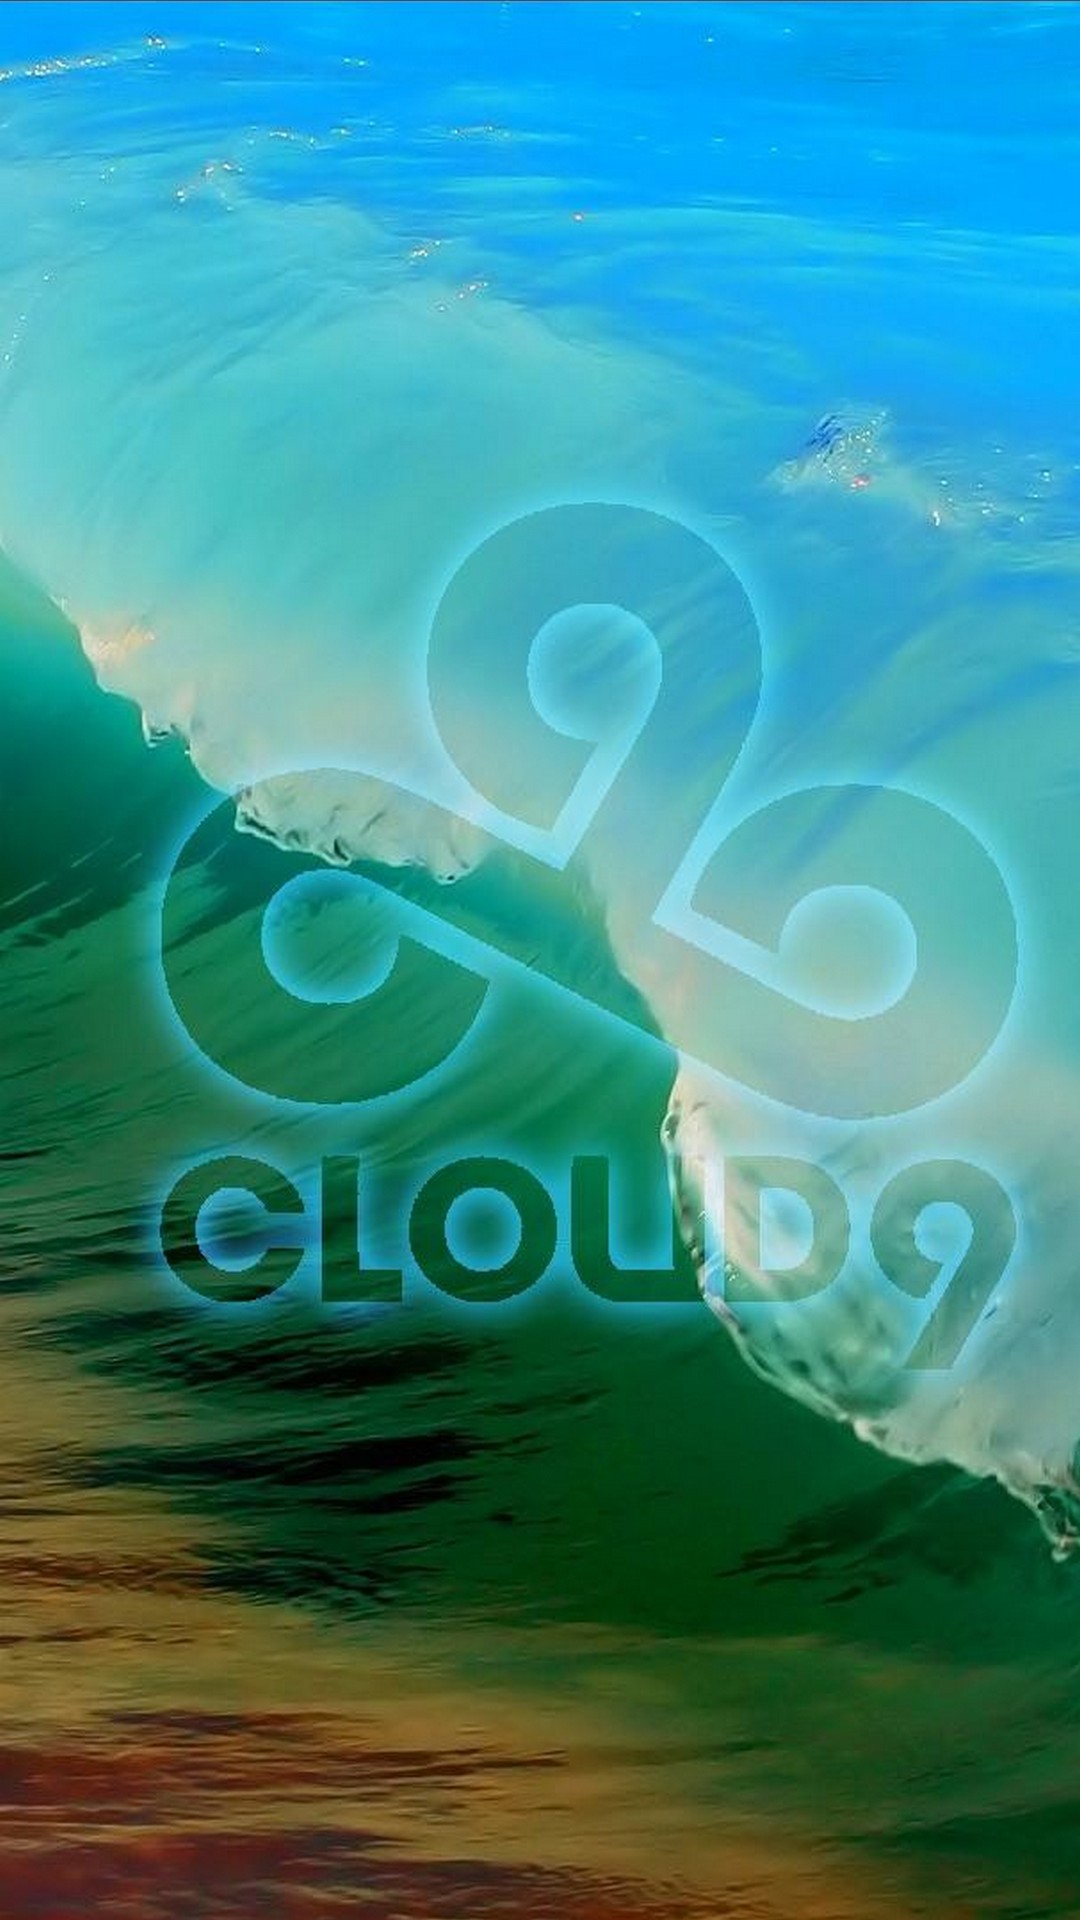 iPhone Wallpaper Cloud 9 Games with HD Resolution 1080X1920